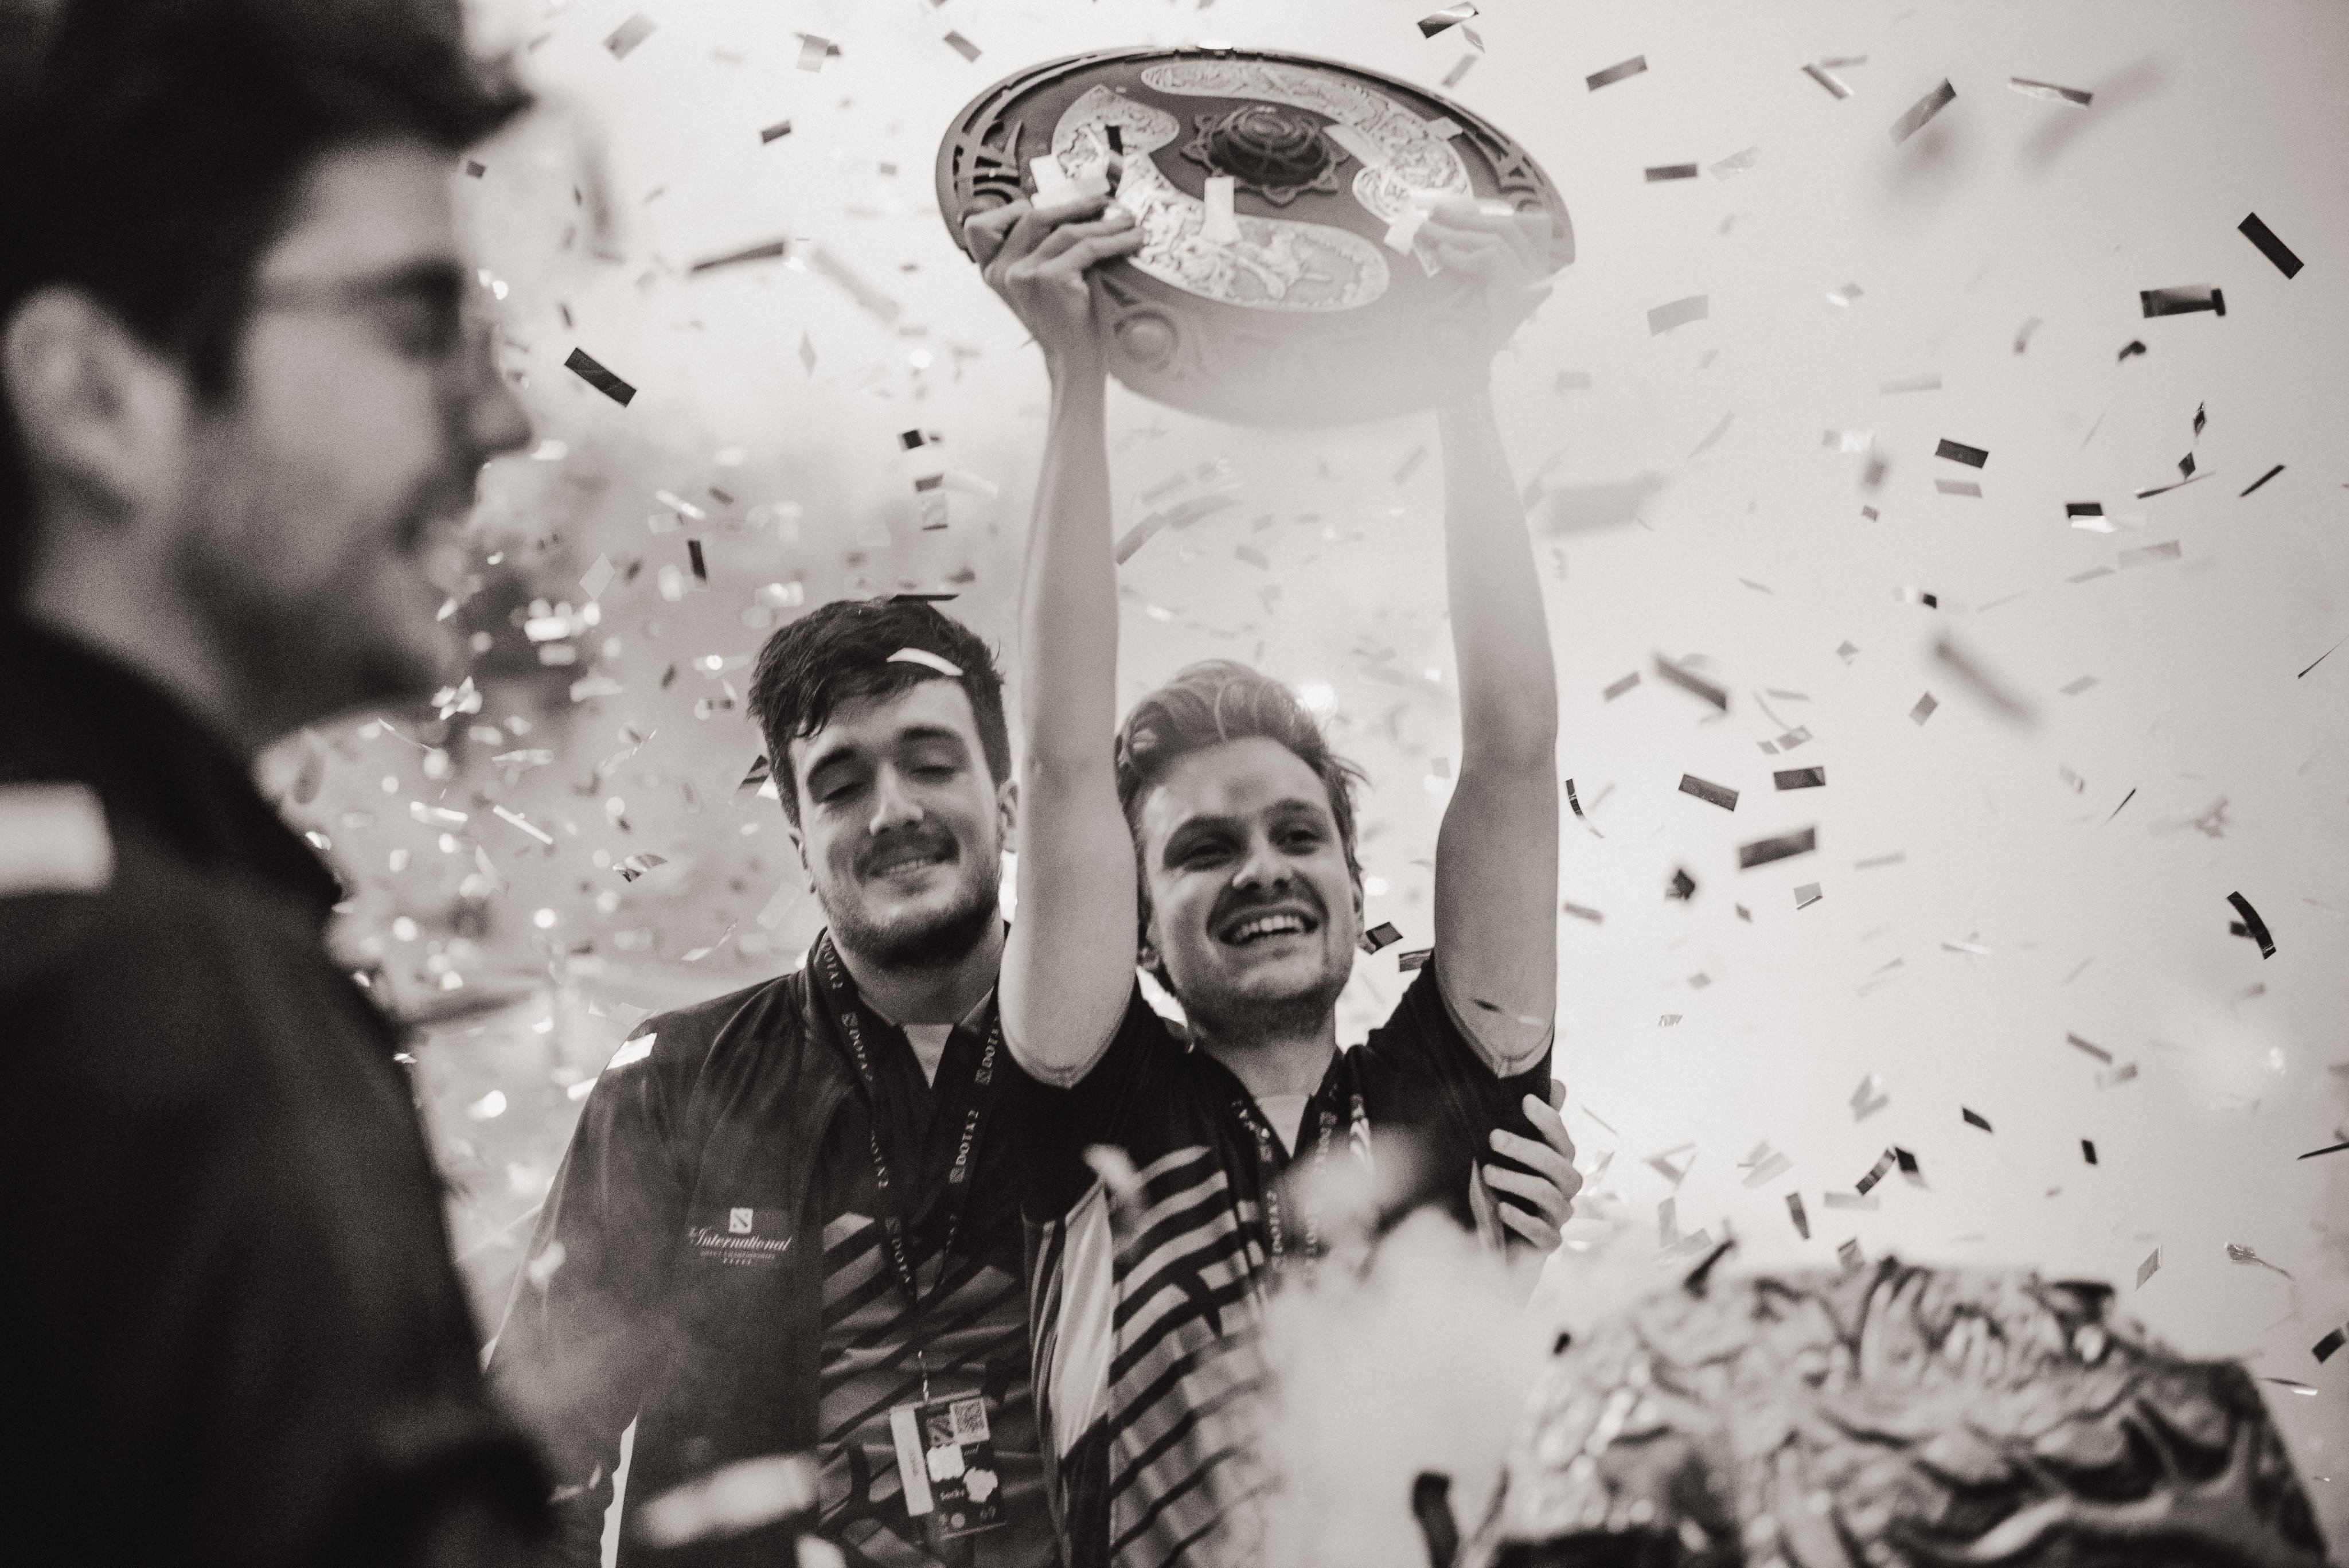 OG Gaming was the last team to win The International, in 2019. Image: Twitter